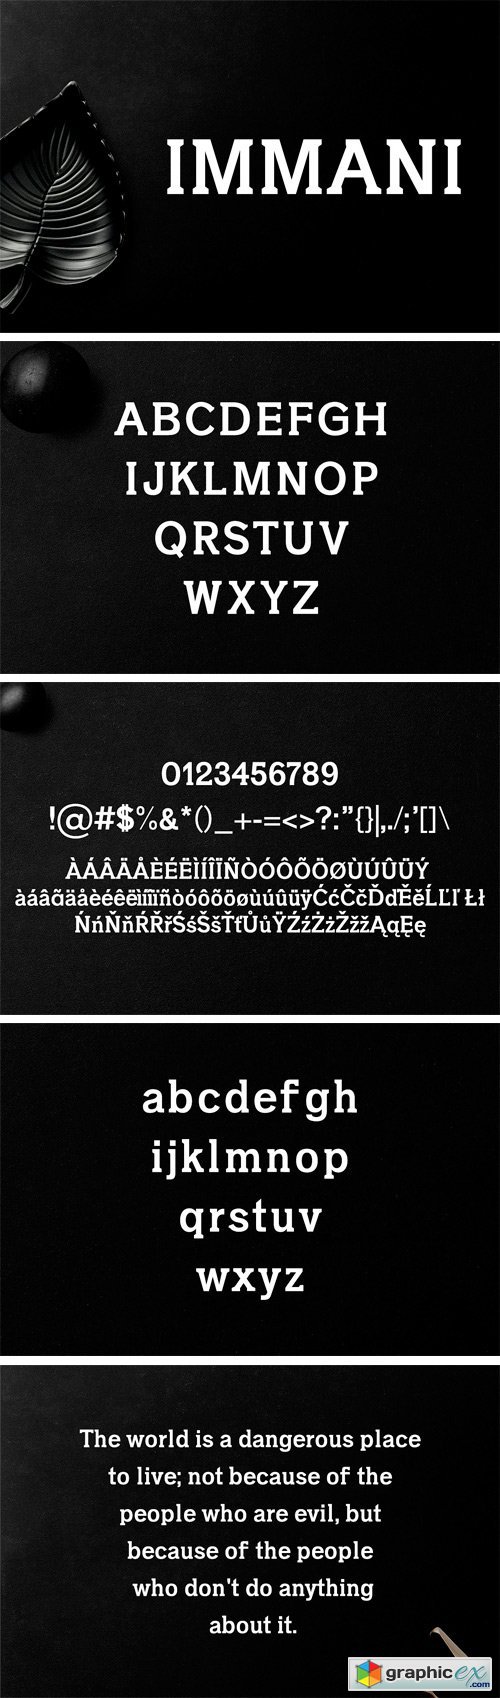 Immani 2 Font Family Pack